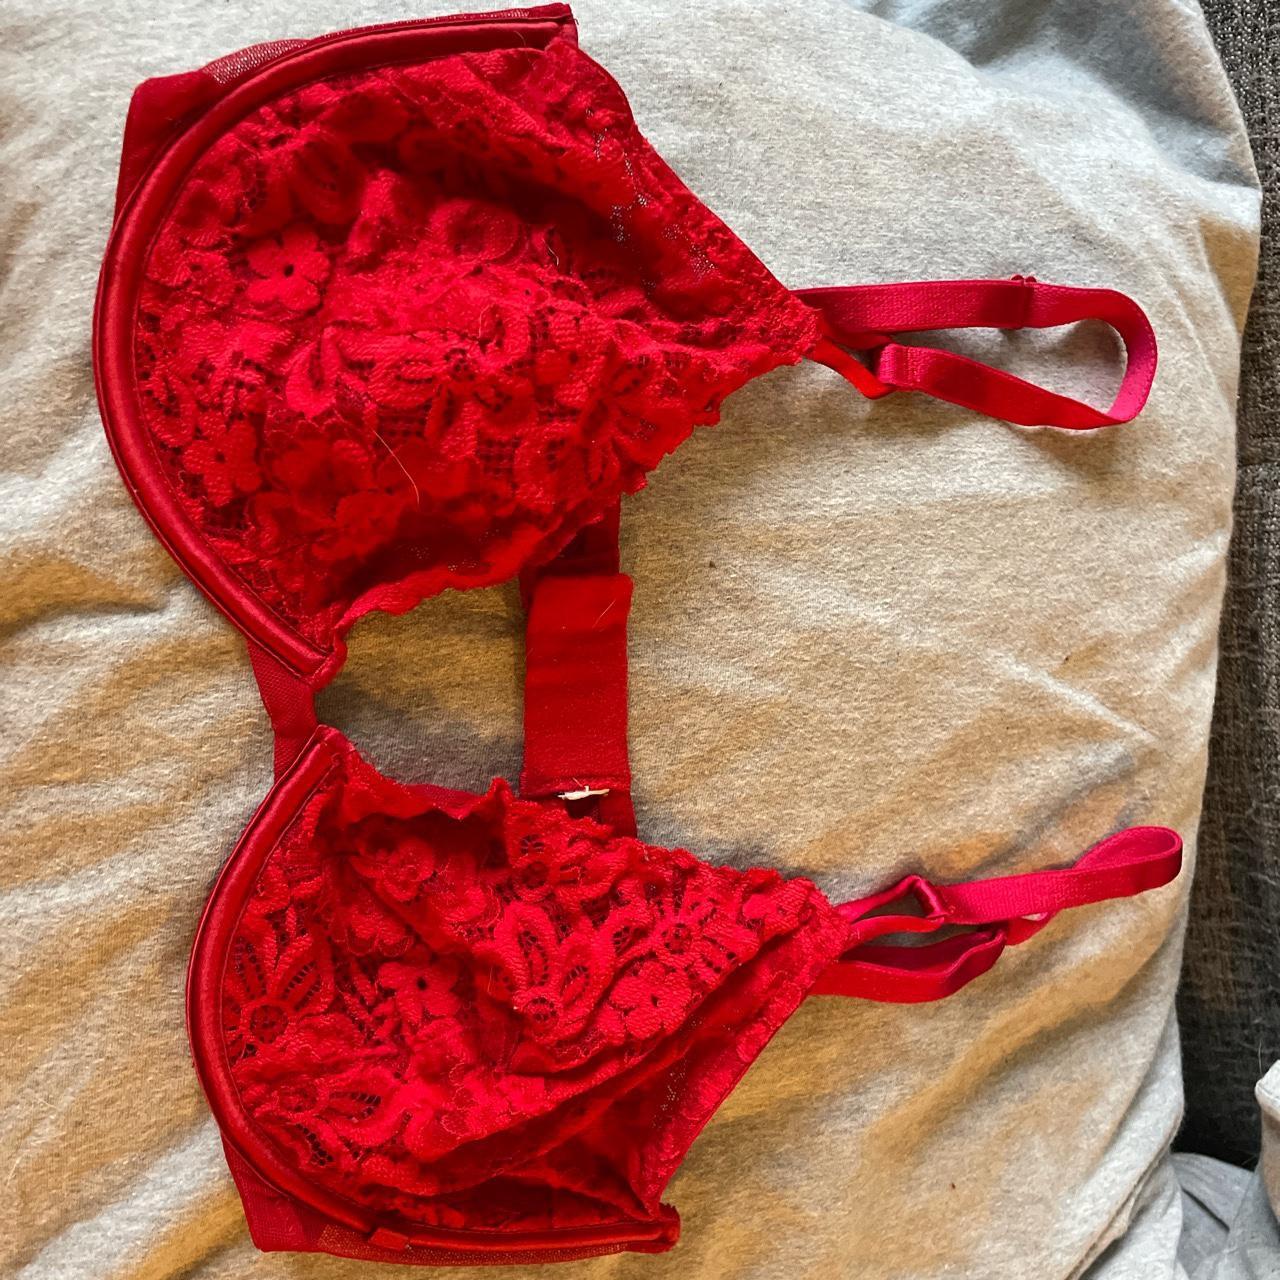 NWT WhatWaist Define Band in color Scarlet. Size - Depop